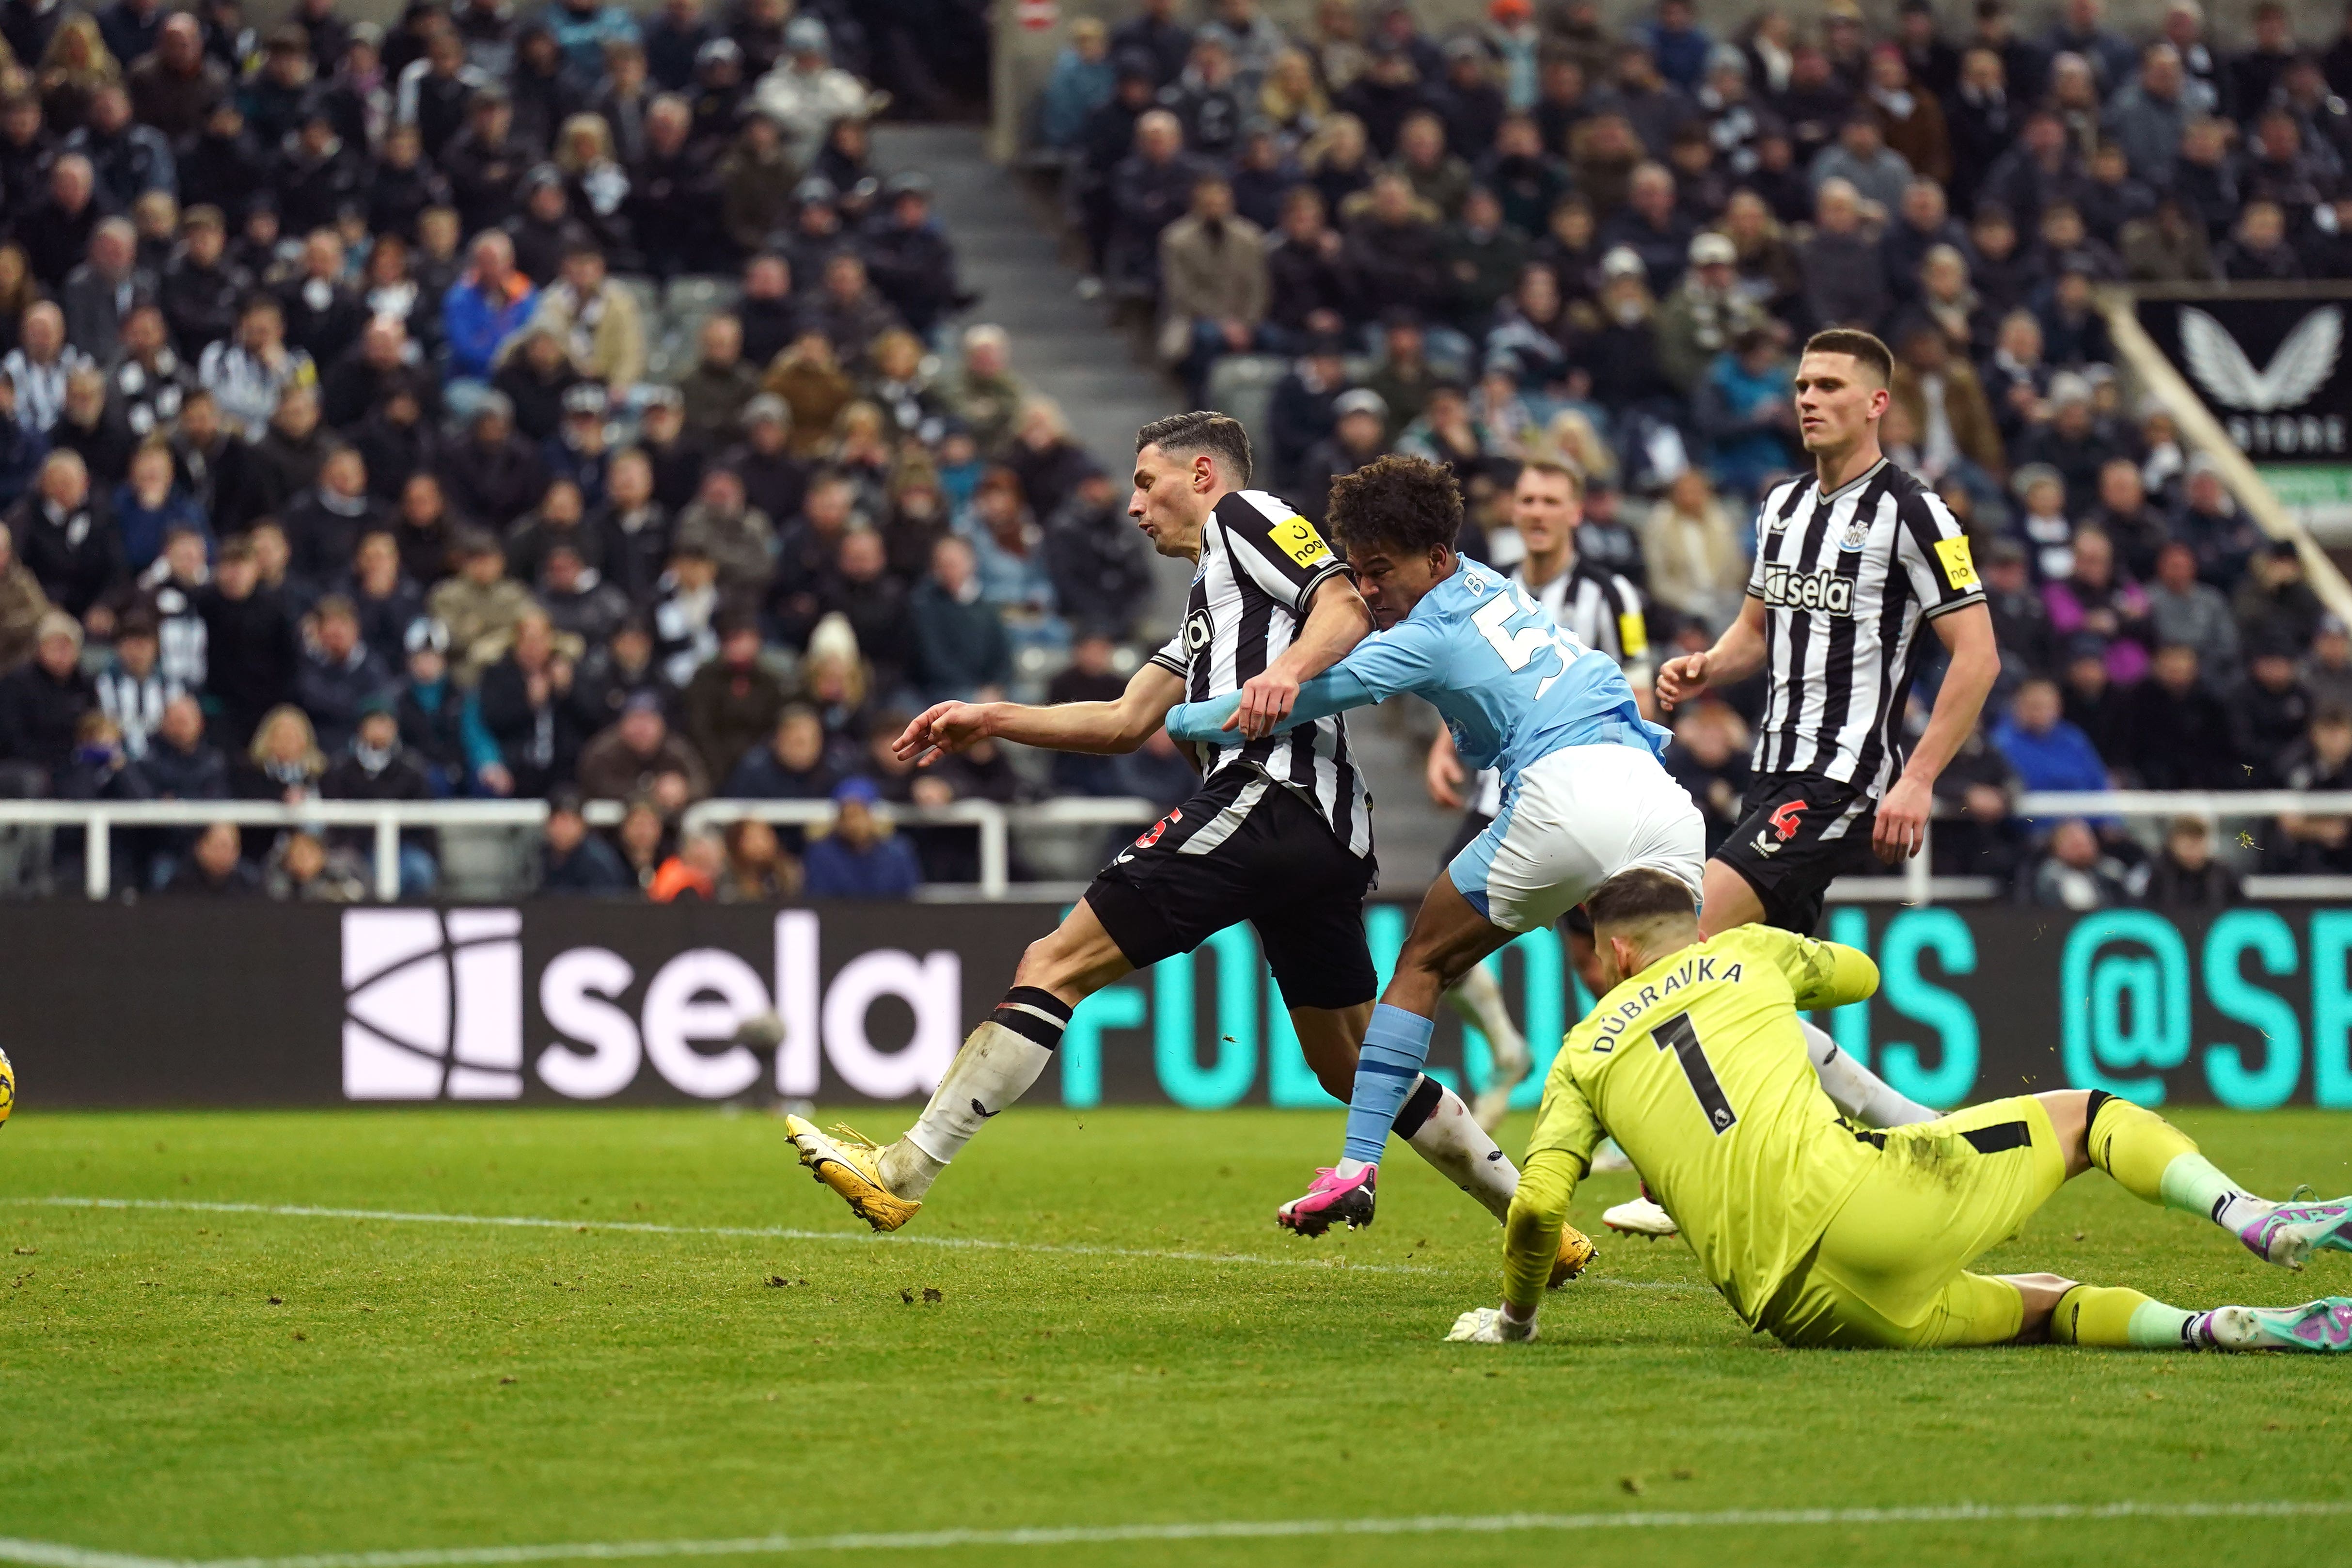 Oscar Bobb’s goal at Newcastle was a significant moment in Manchester City’s campaign (Owen Humphreys/PA)